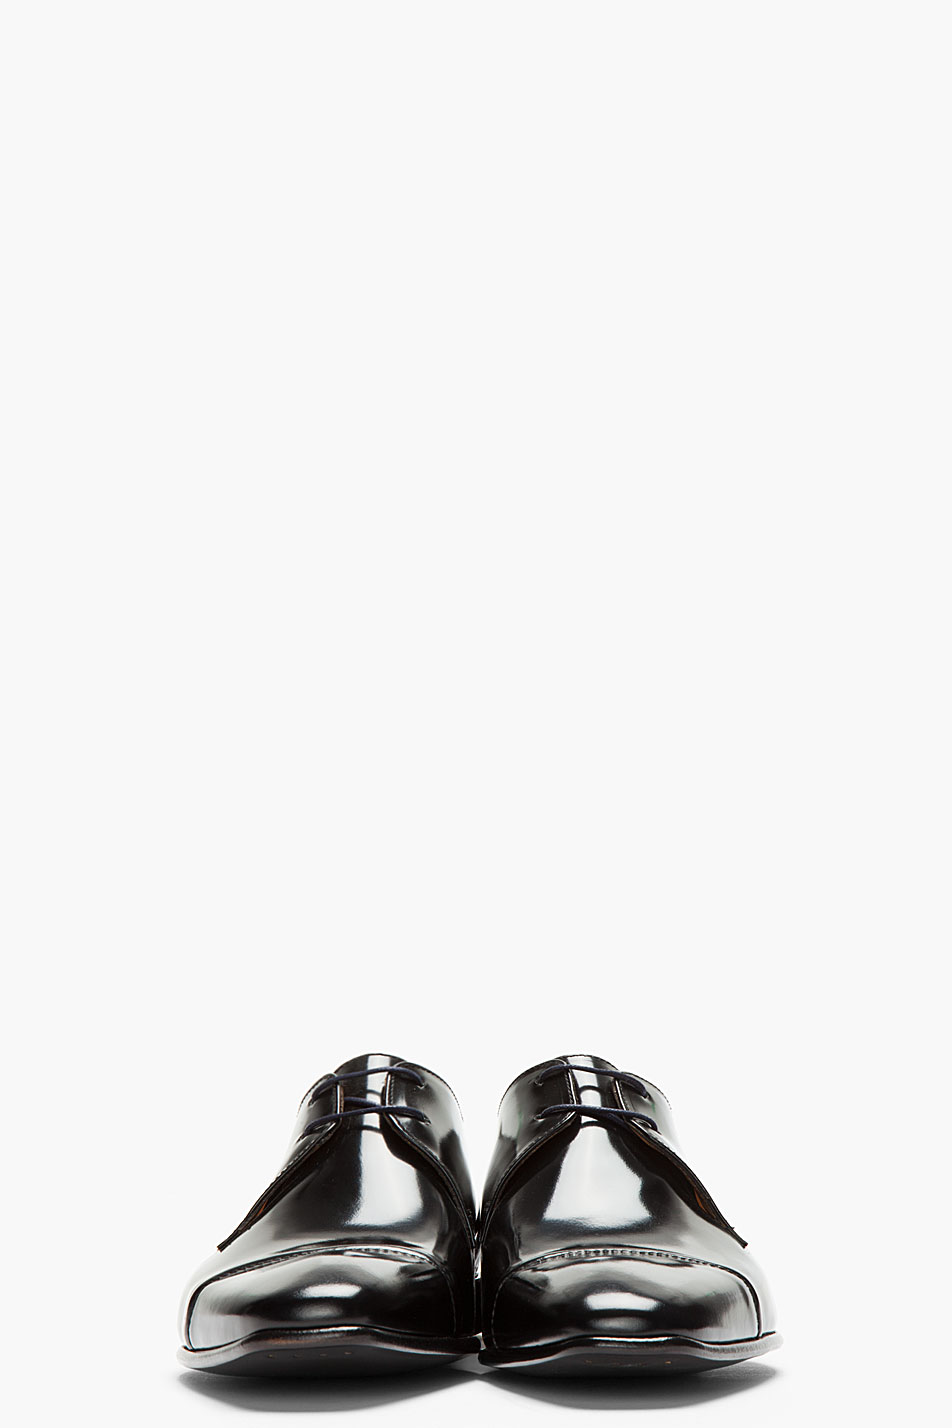 Dress to Impress Black Patent Leather Shoes 3